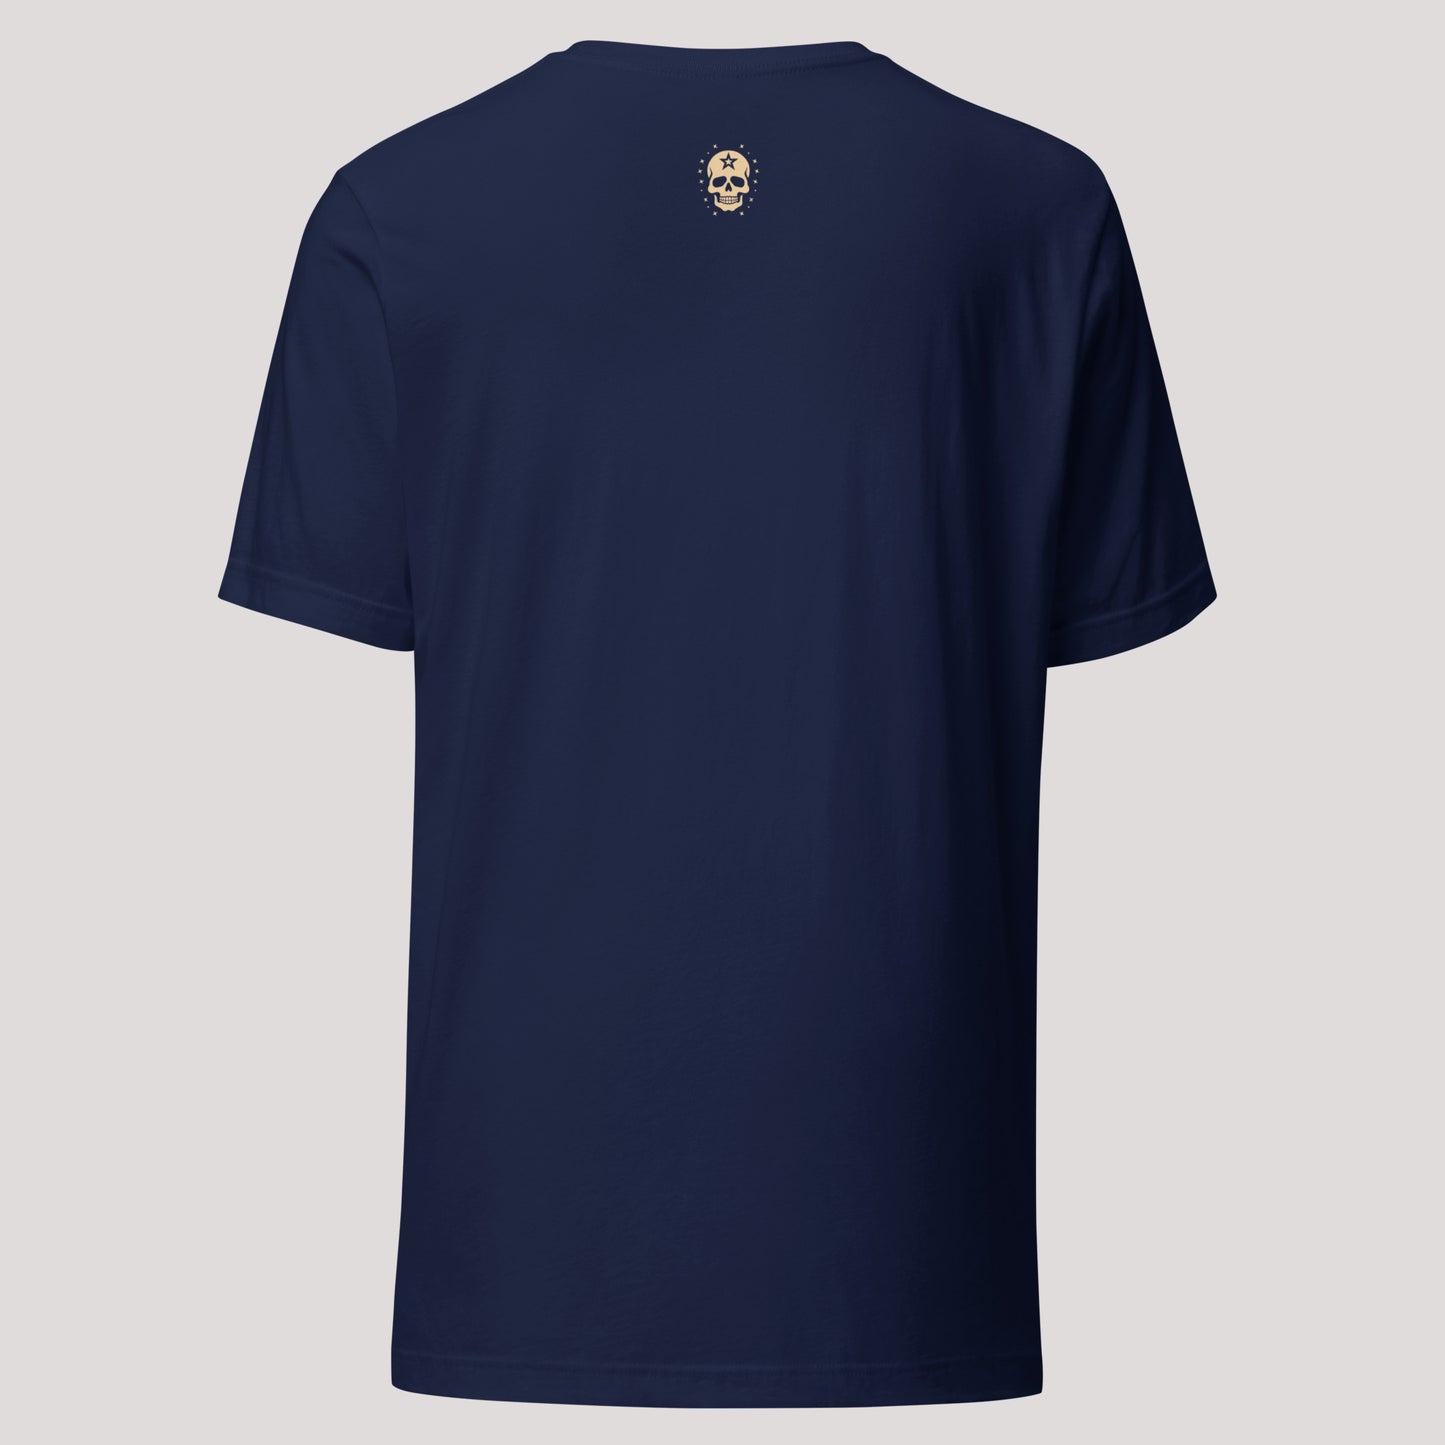 back view of navy Anchor's Tale Unisex t-shirt